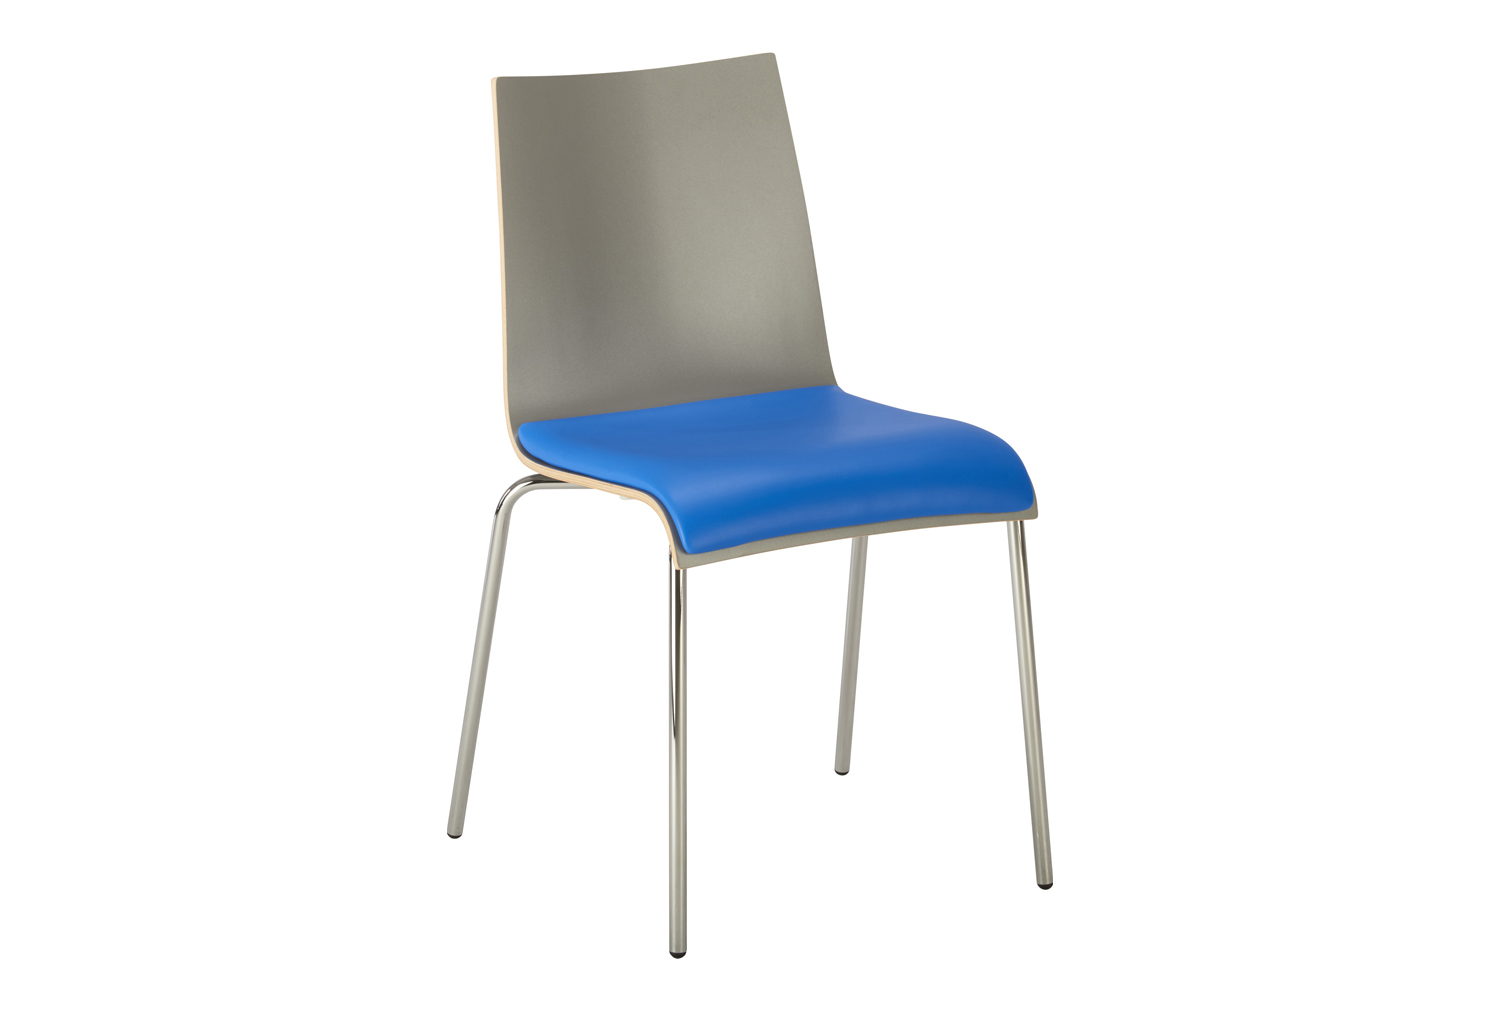 Wilson Upholstered Seat Stacking Dining Reception Chair, Light Grey, Aqua